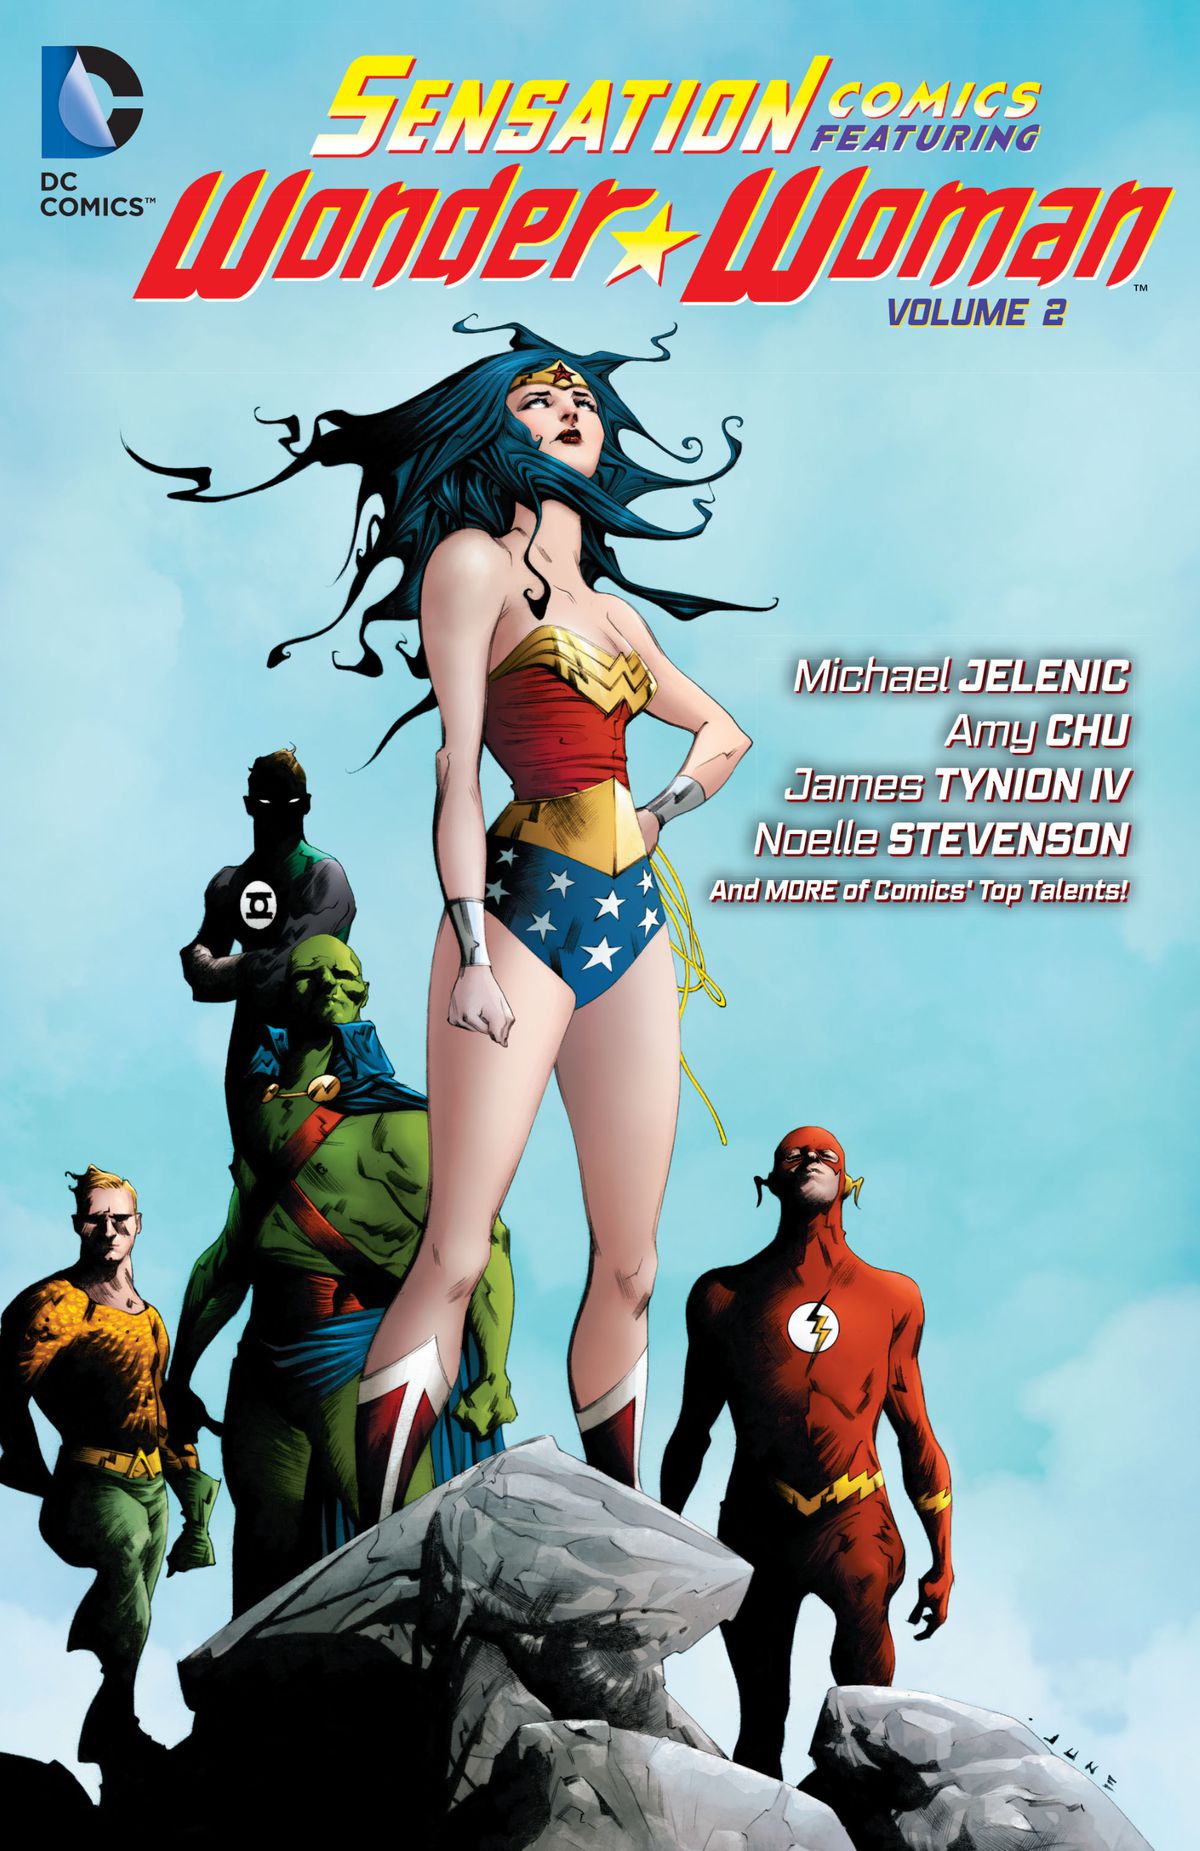 Wonder Woman stands with Green Lantern, Aquaman, the Martian Manhunter, and the Flash behind her on the cover of Sensation Comics Featuring Wonder Woman Vol. 2. 